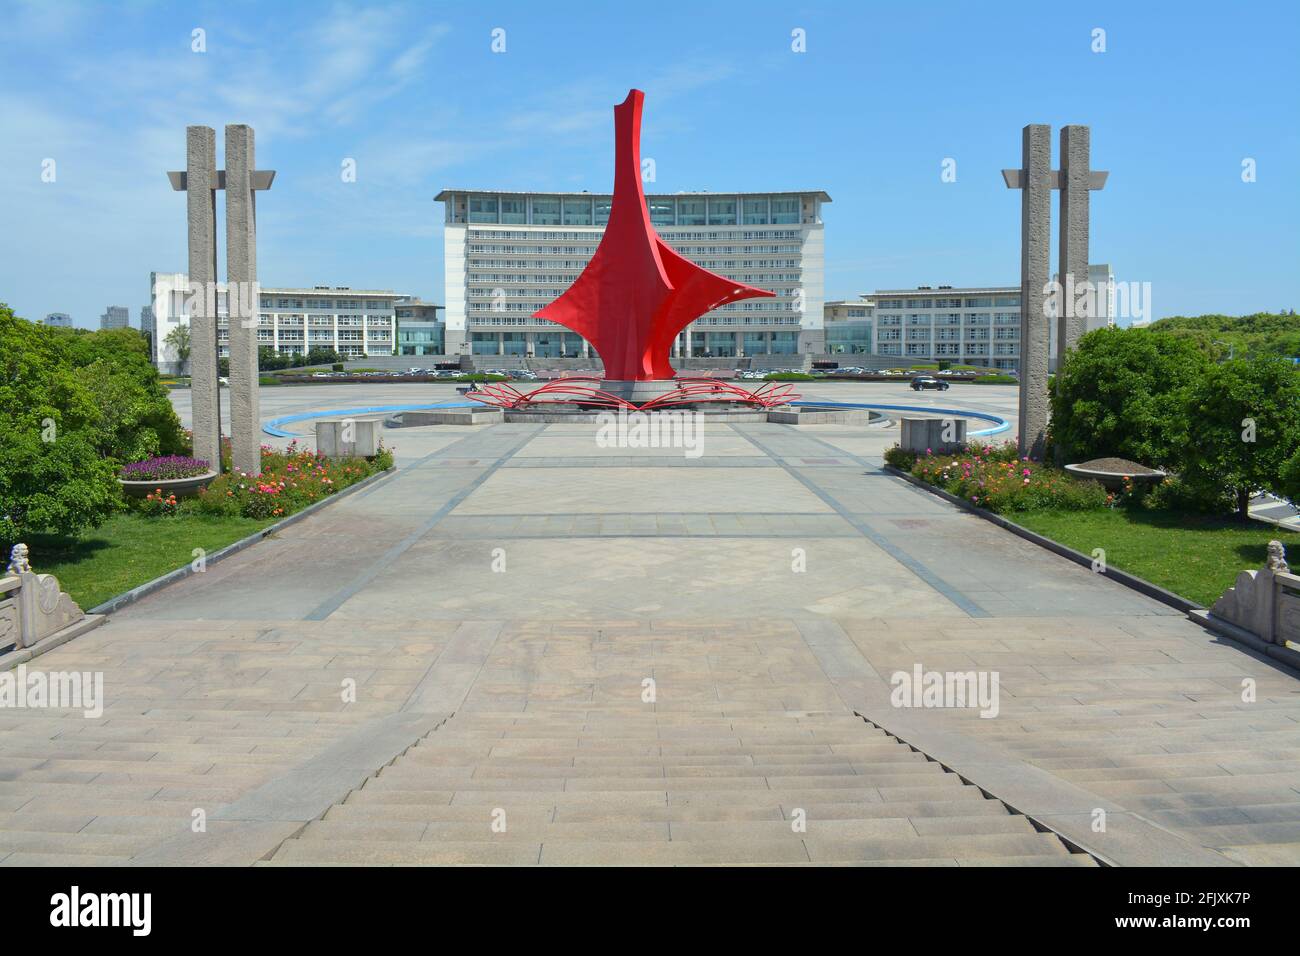 Large red modern art sculpture in front of the offices of the Jiaxing People's government building. Stock Photo